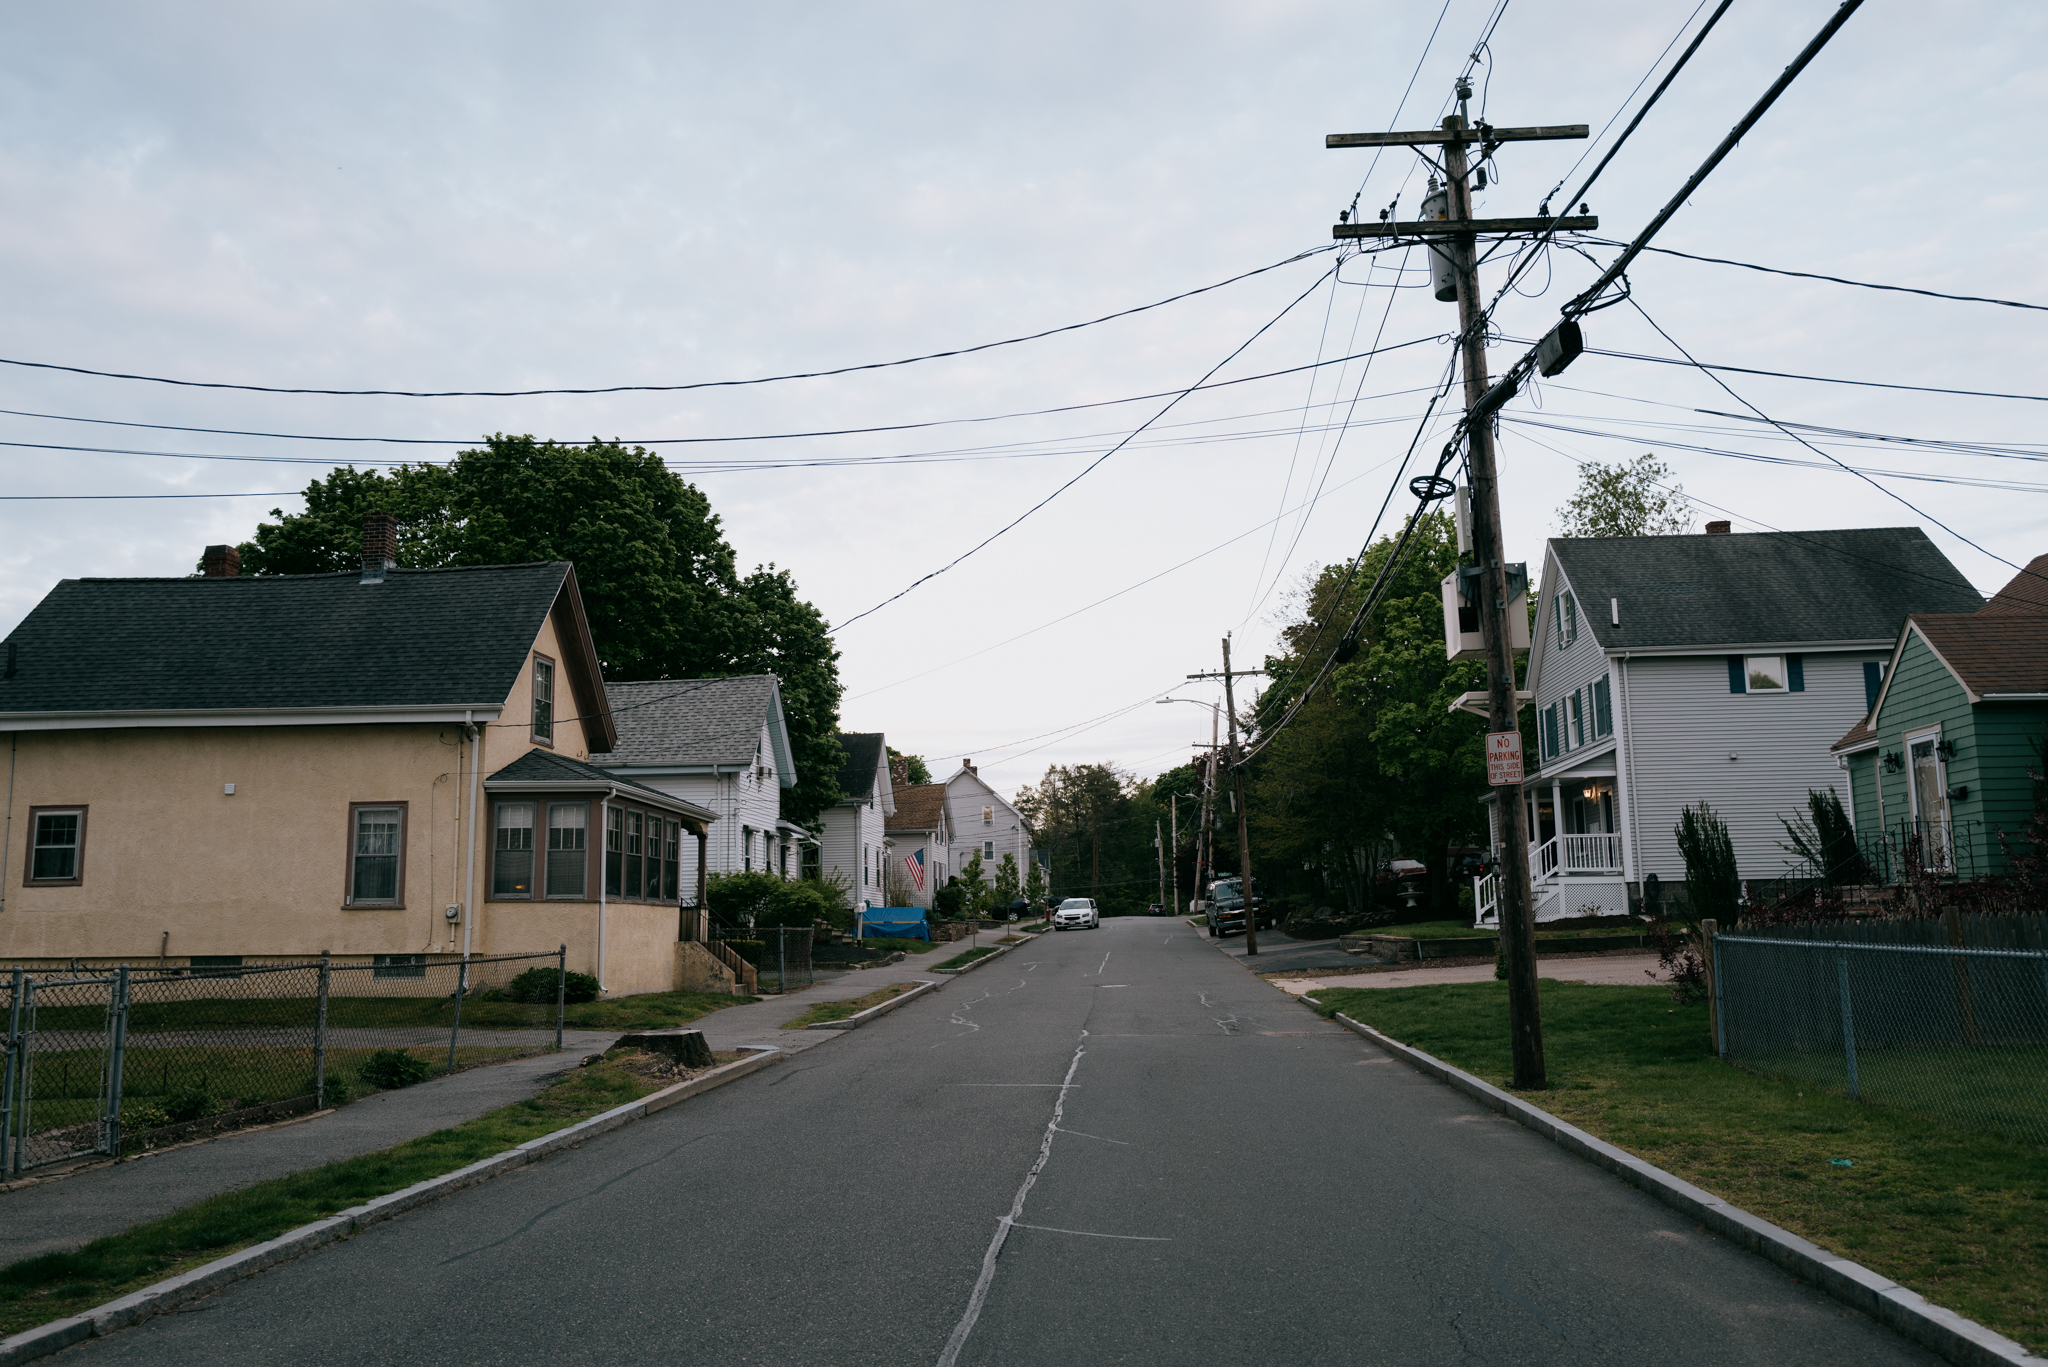 Houses in a suburban neighborhood in Massachusetts. Image captured with a Leica Q2